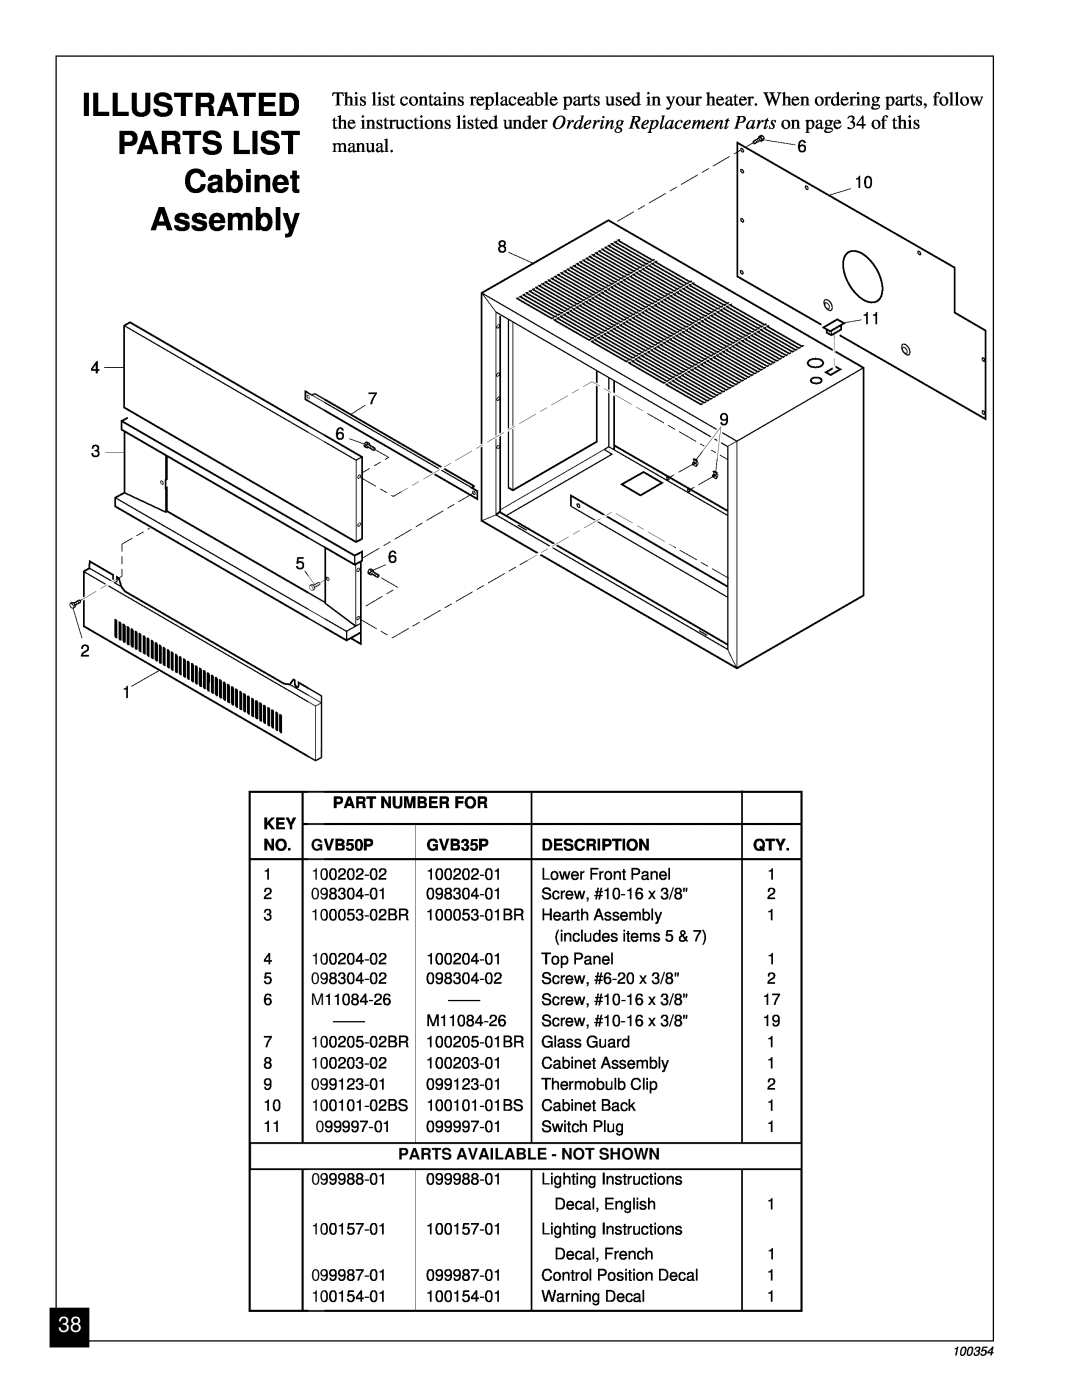 Vanguard Heating GVB50P, GVB35P installation manual ILLUSTRATED PARTS LIST Cabinet Assembly 